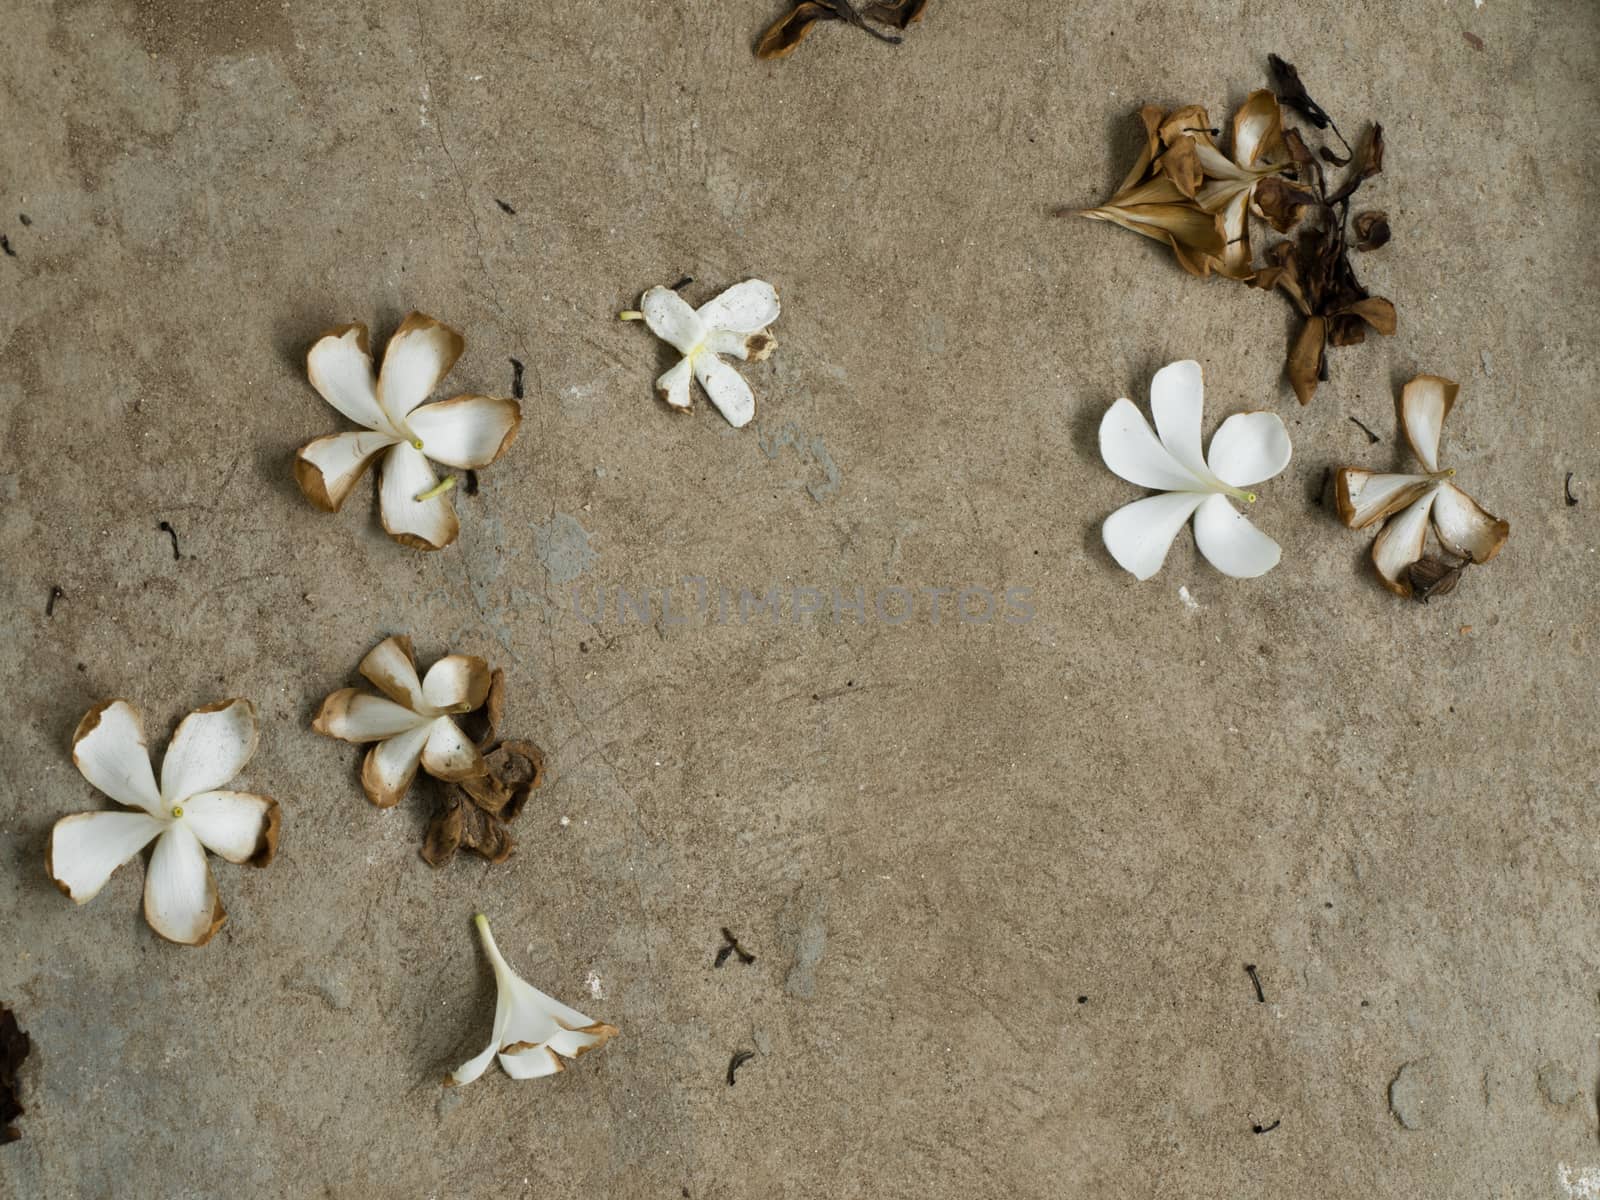 COLOR PHOTO OF FLOWERS ON THE CONCRETE GROUND